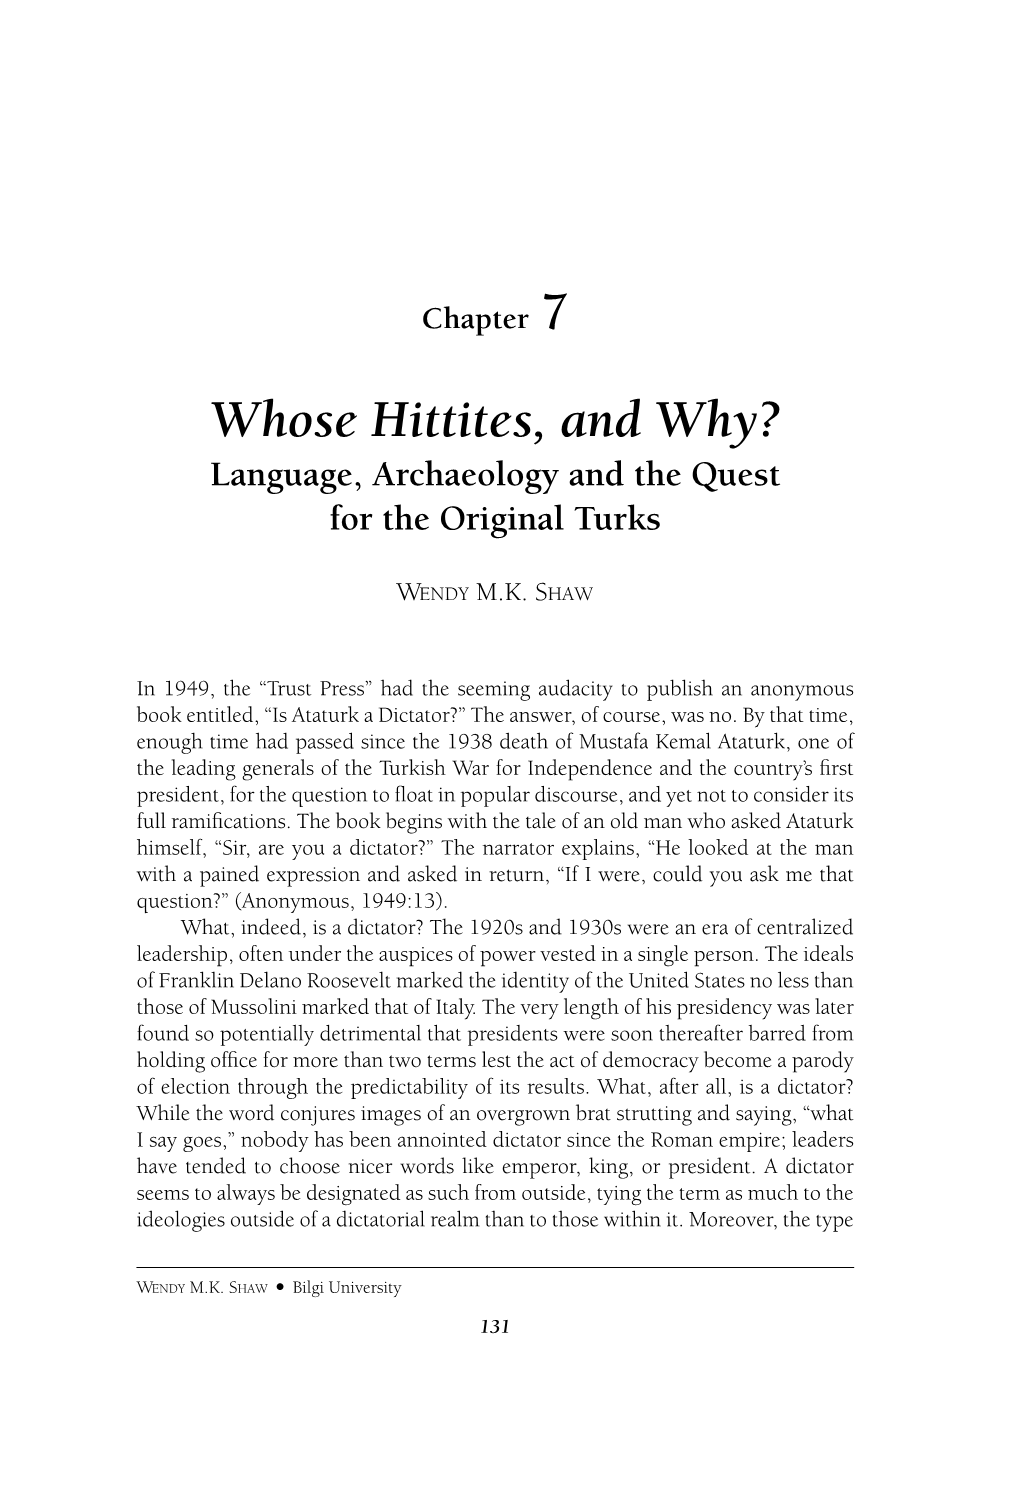 Whose Hittites, and Why? Language, Archaeology and the Quest for the Original Turks